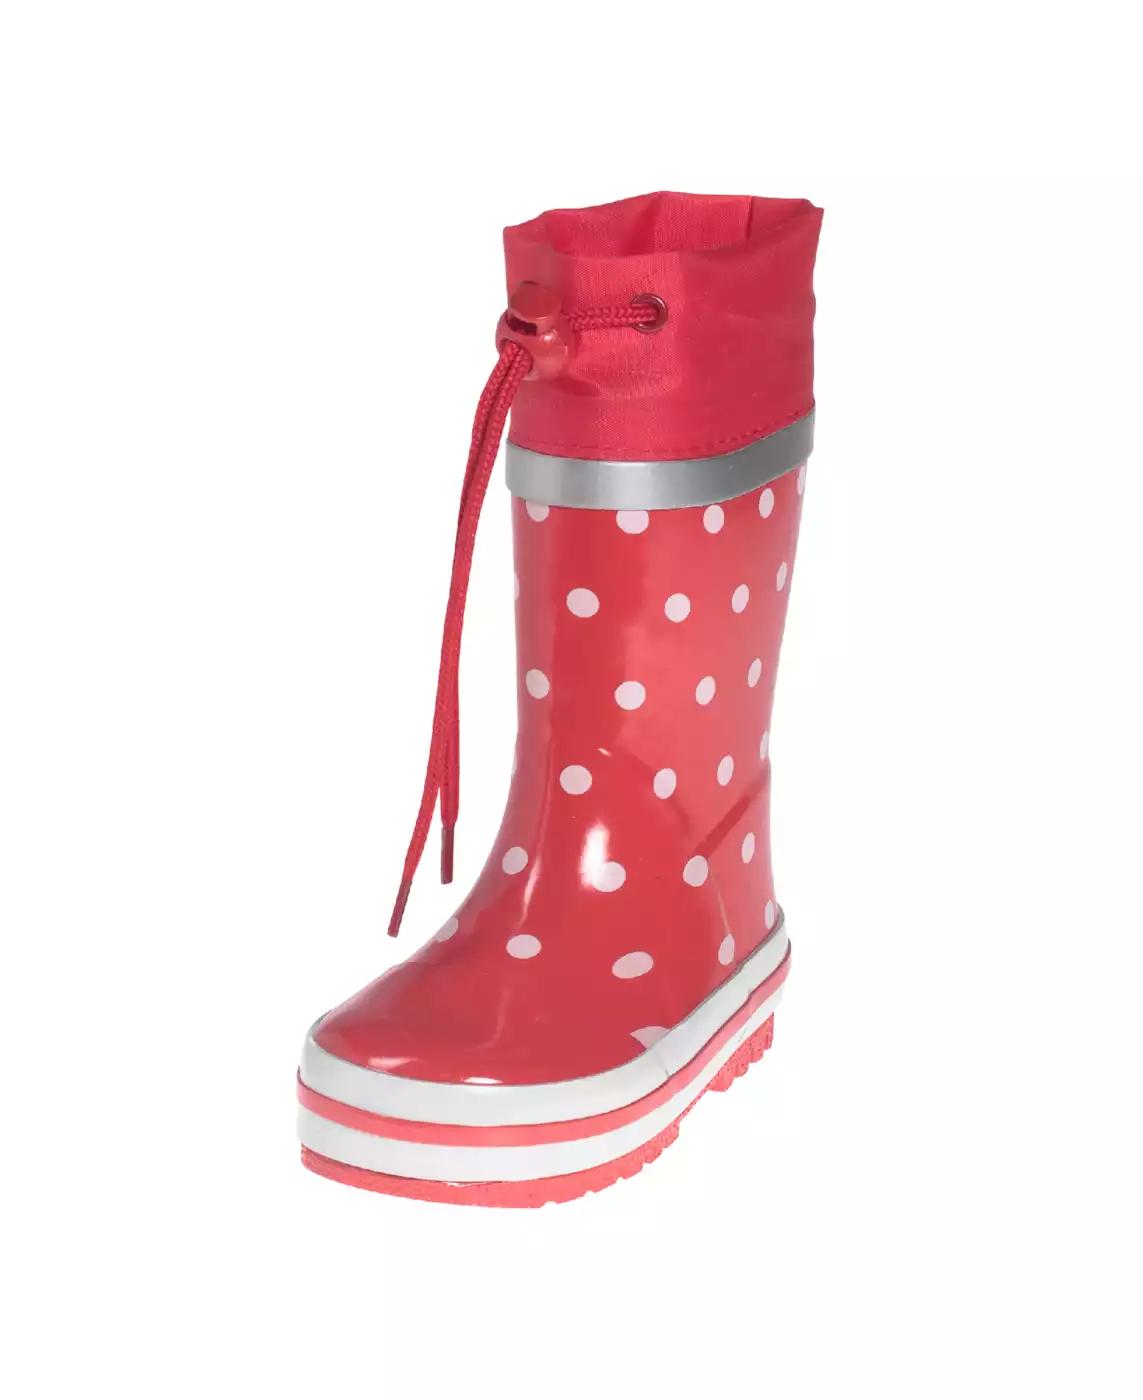 Gummistiefel Punkte Playshoes Rot M2027558518007 3